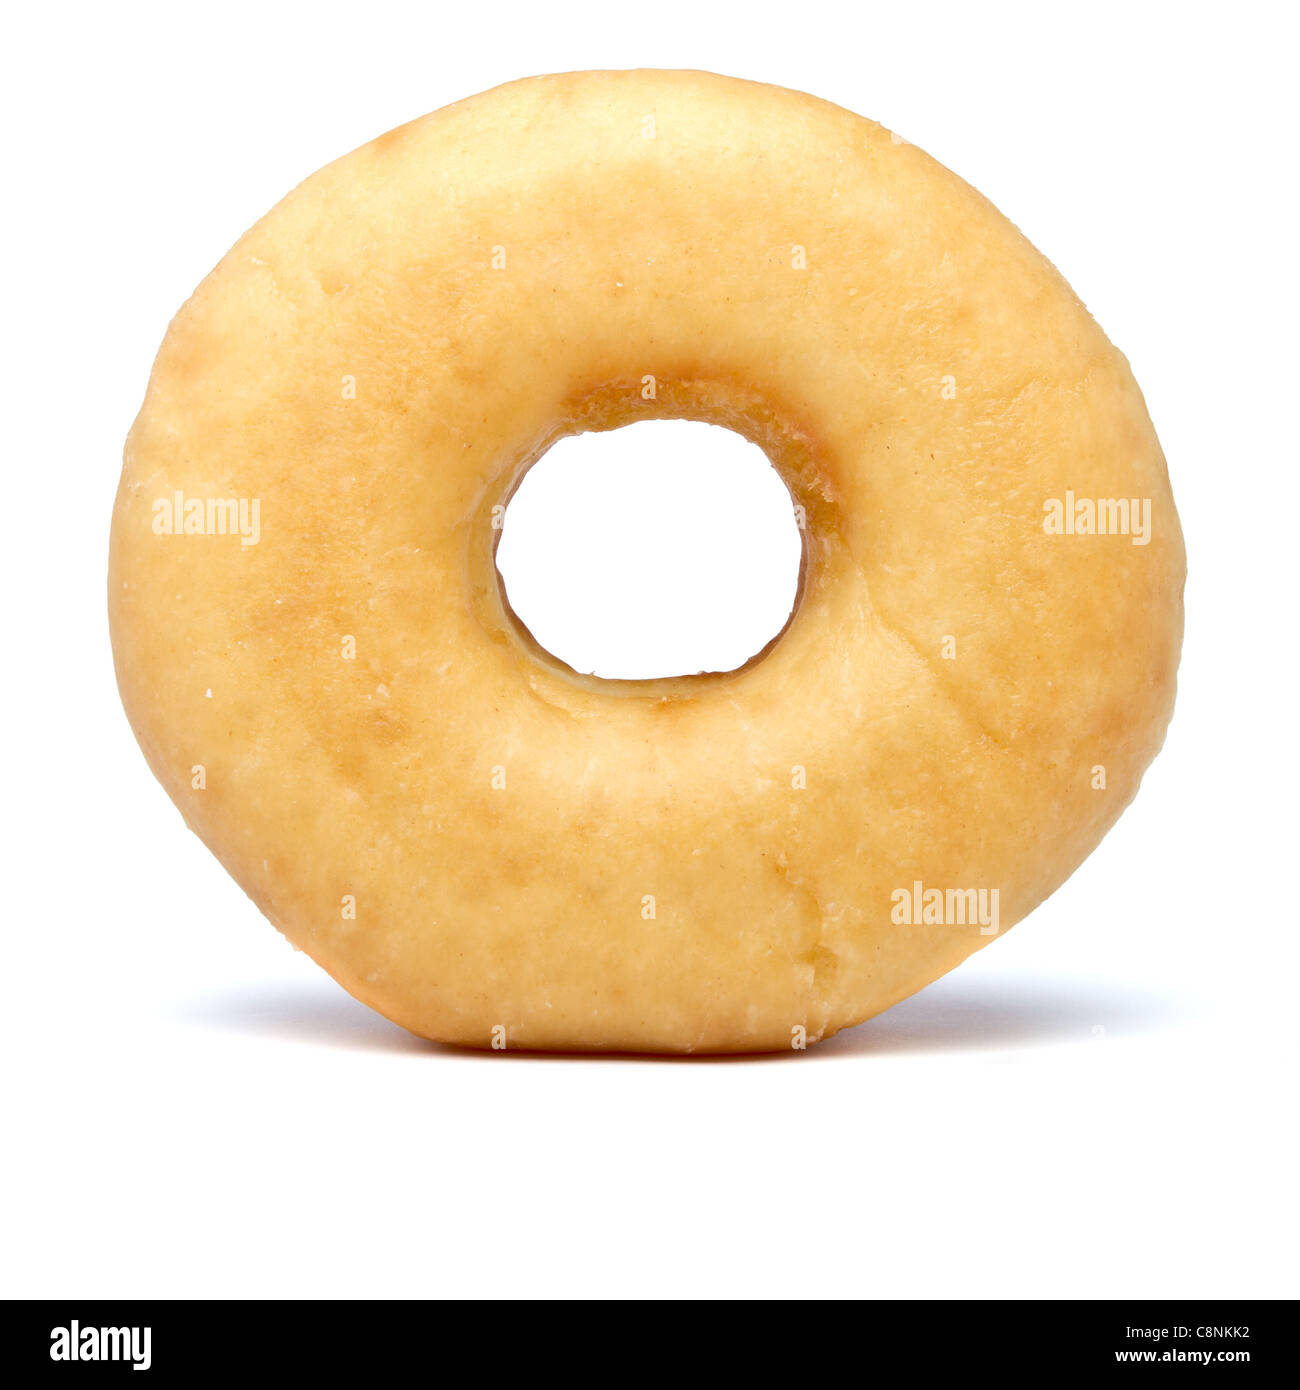 Single sugared plain doughnut from low perspective. Stock Photo